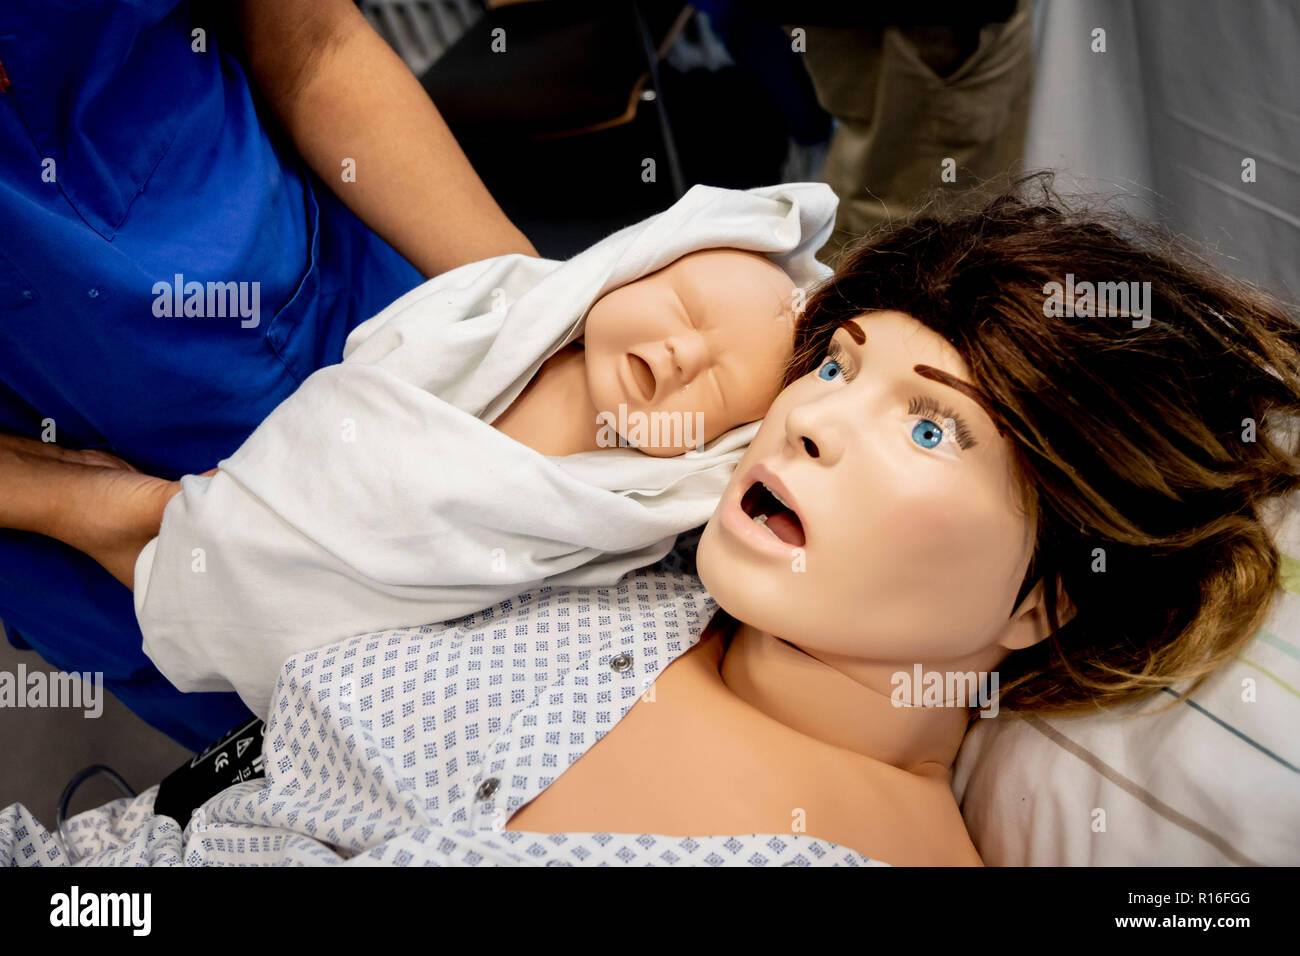 https://c8.alamy.com/comp/R16FGG/berlin-germany-09th-nov-2018-a-charit-employee-holds-a-baby-doll-next-to-the-corresponding-birth-simulation-doll-with-the-simulation-dummy-junior-doctors-and-midwives-at-the-charit-can-train-the-processes-involved-in-childbirth-credit-christoph-soederdpaalamy-live-news-R16FGG.jpg